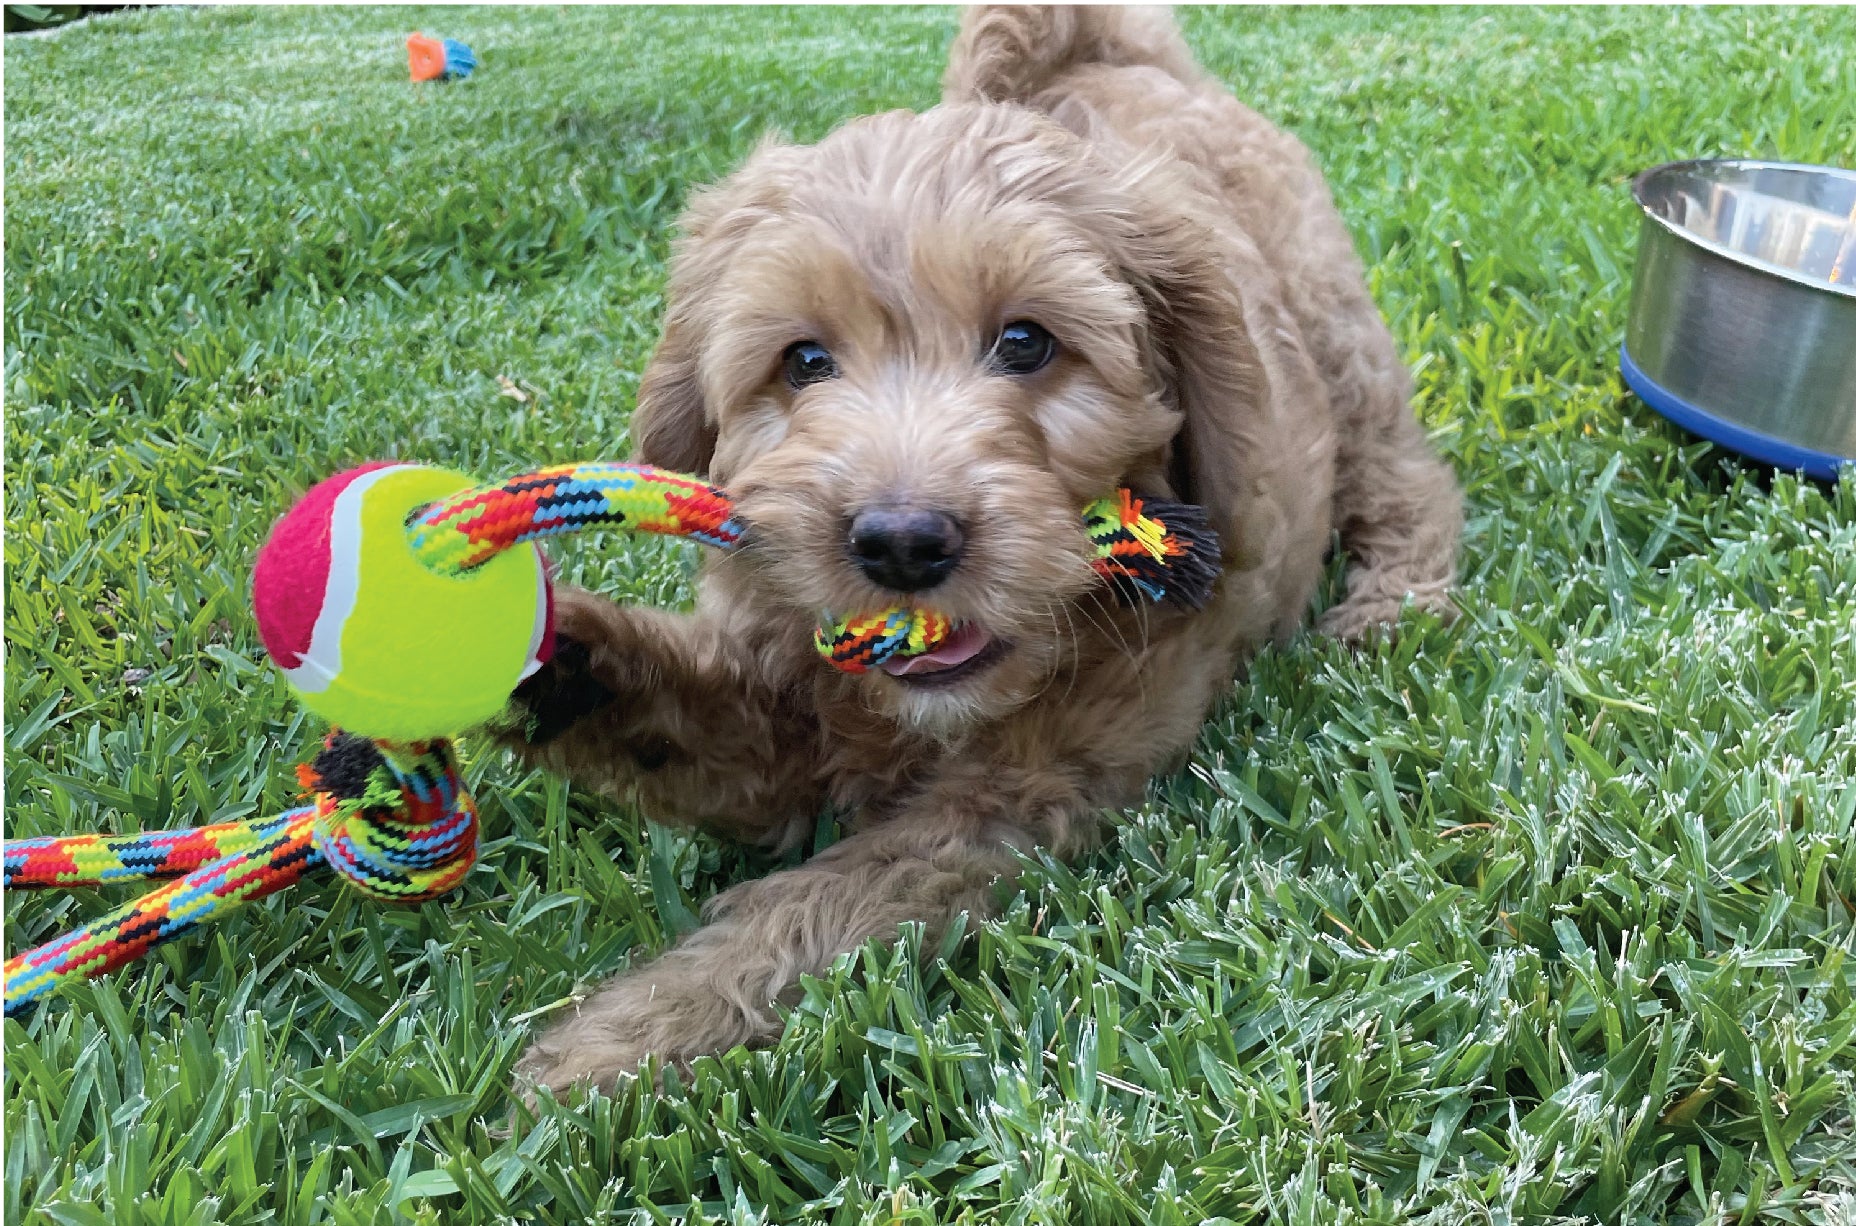 Cute puppy chewing Kazoo rope toy whilst laying on grass